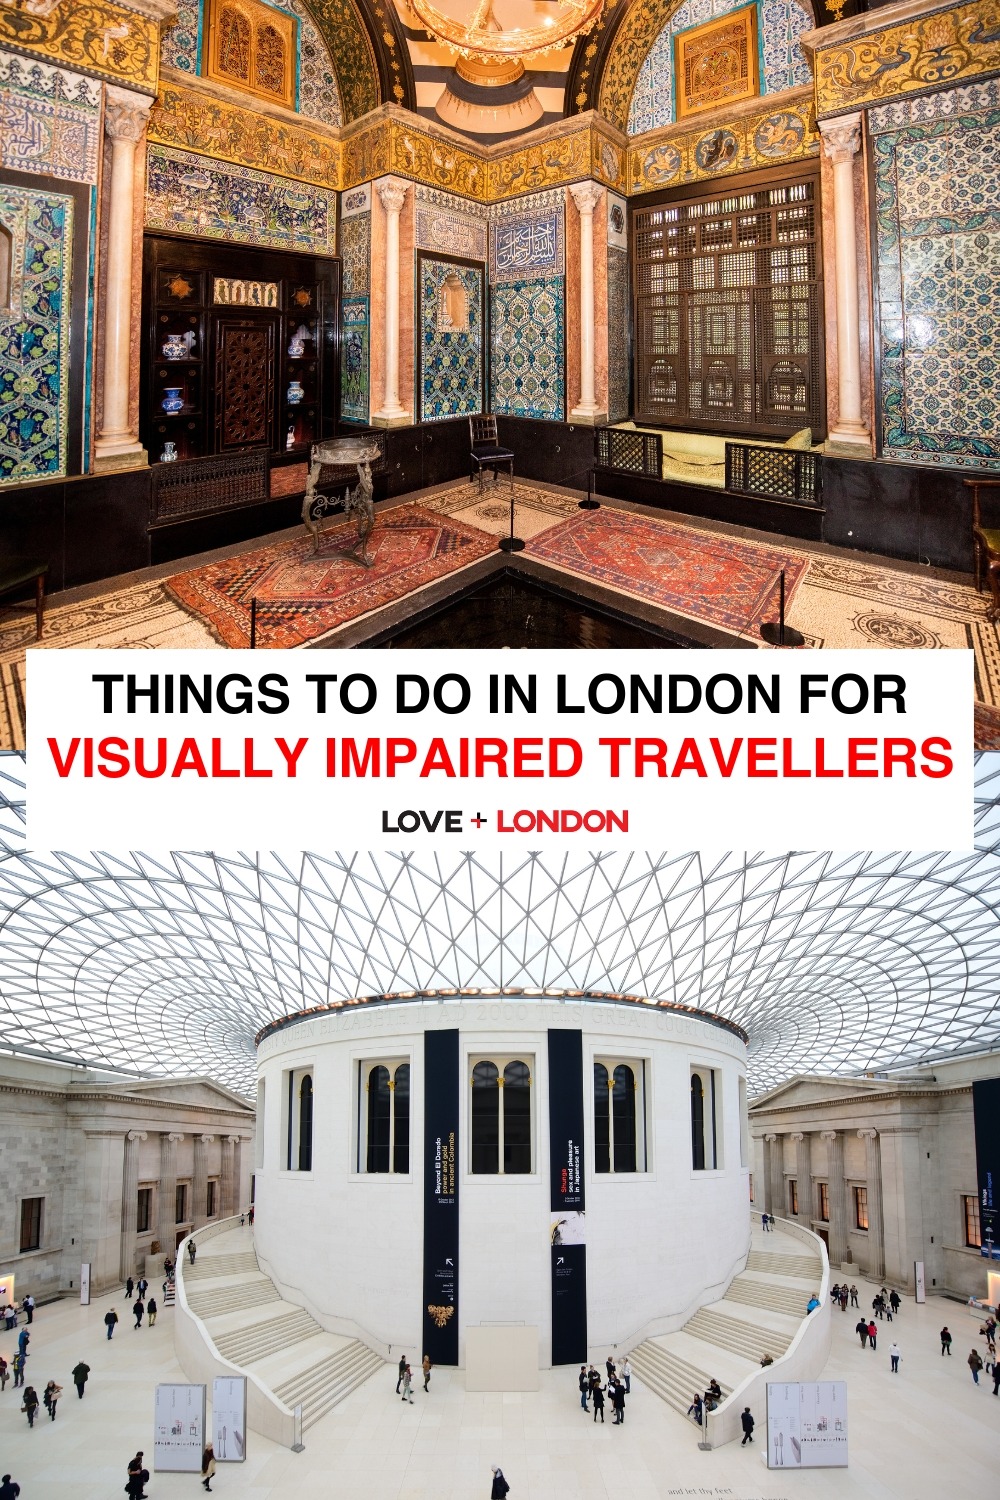 Things to Do in London for Visually Impaired Travellers